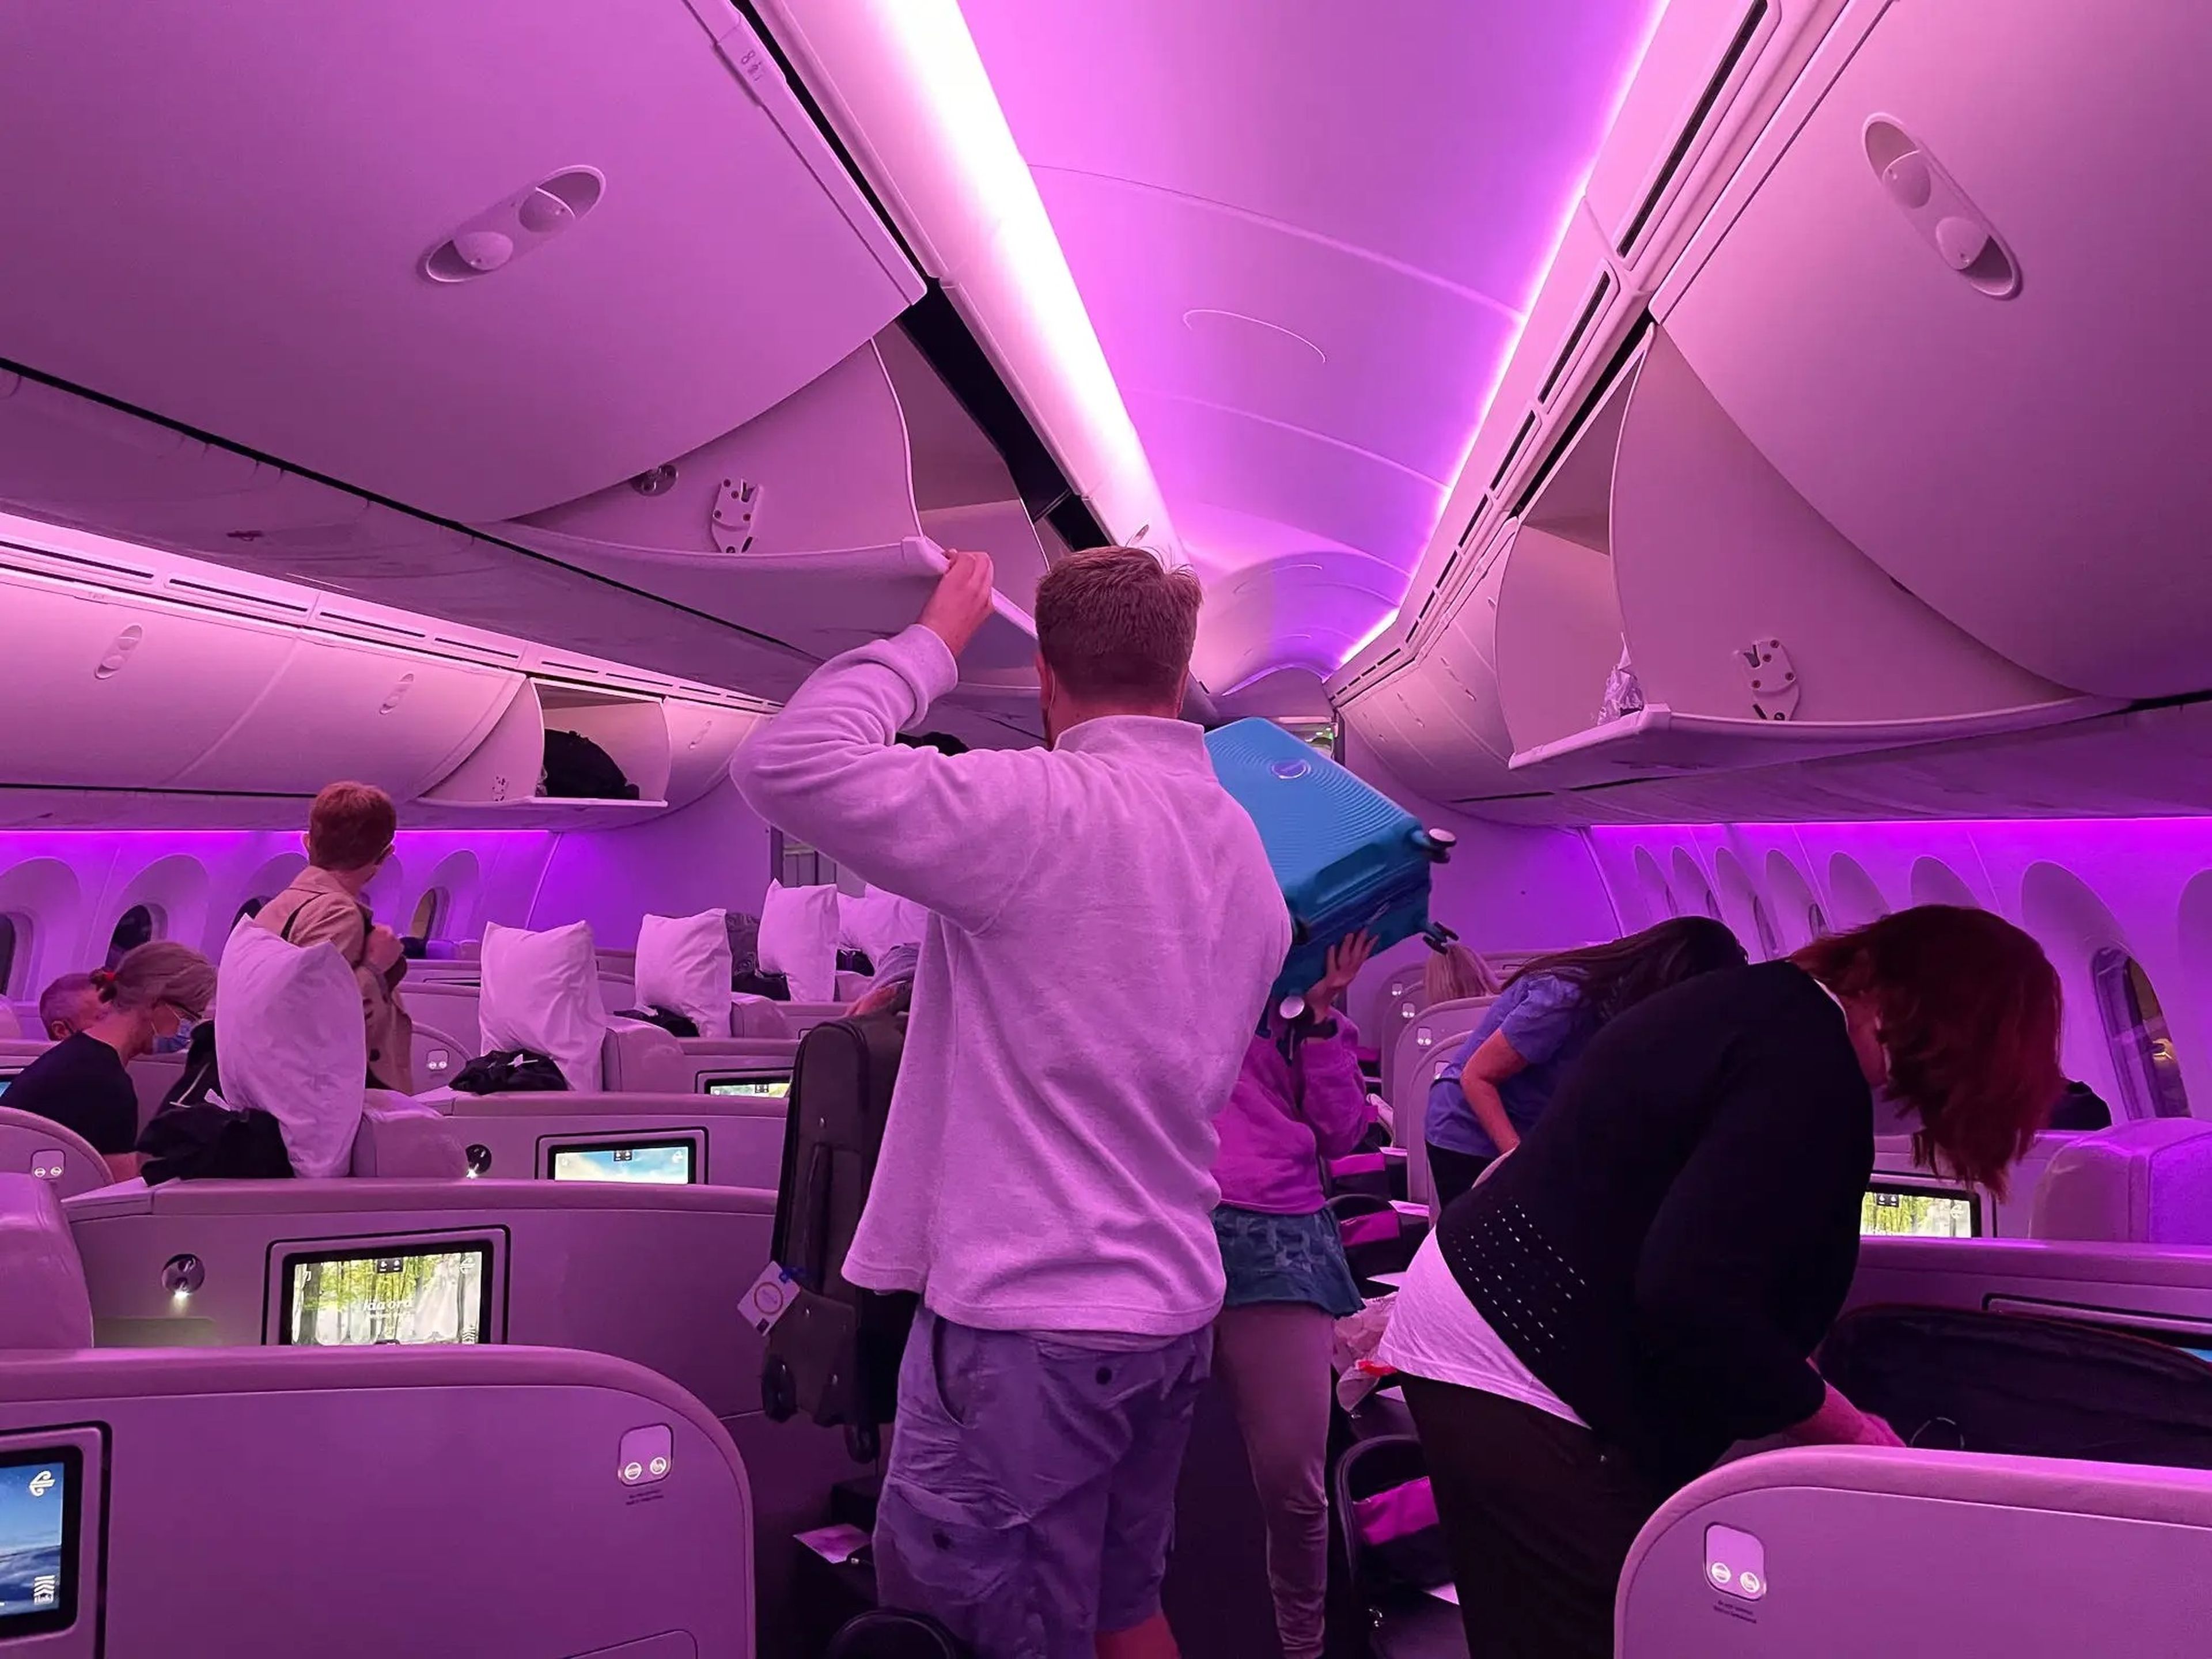 Passengers on a business class flight get their bags from the overhead bins.